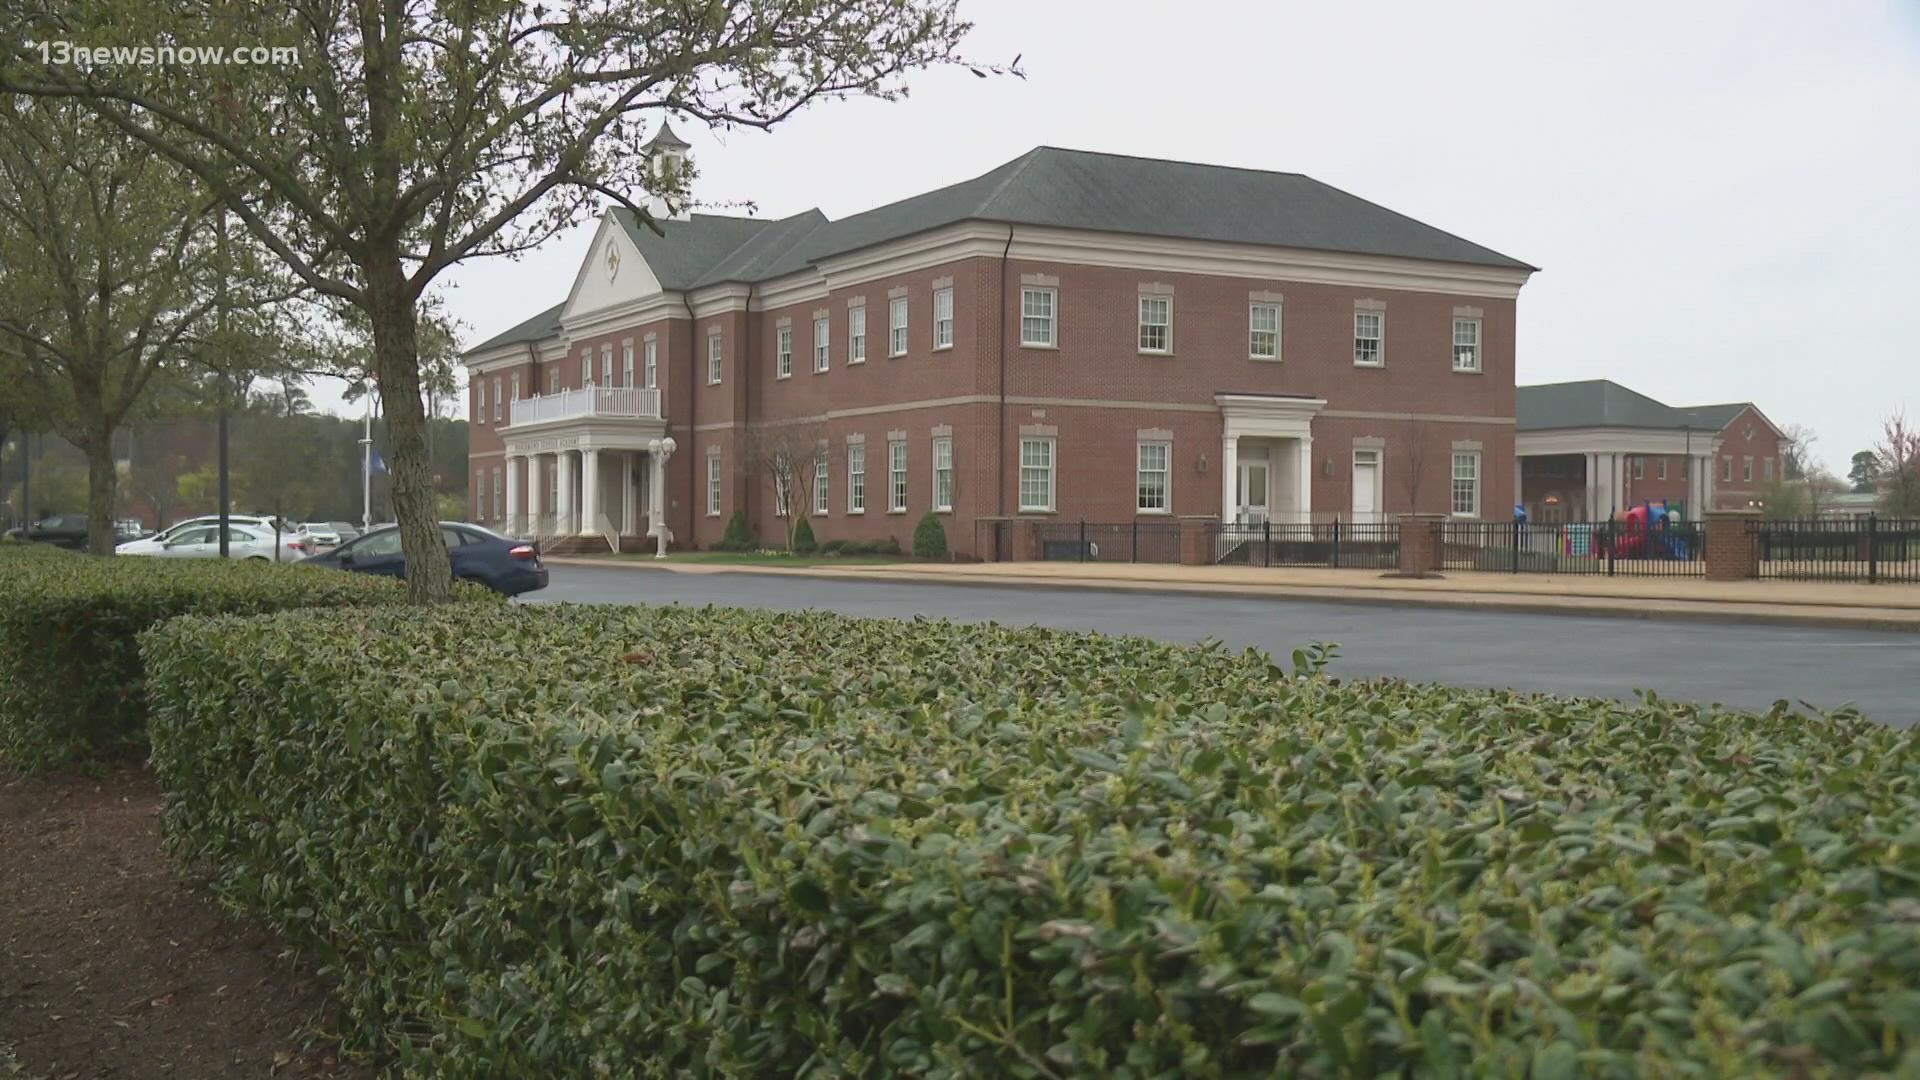 Some faculty members are out of a job at Nansemond Suffolk Academy after an investigation into misconduct in the classroom.